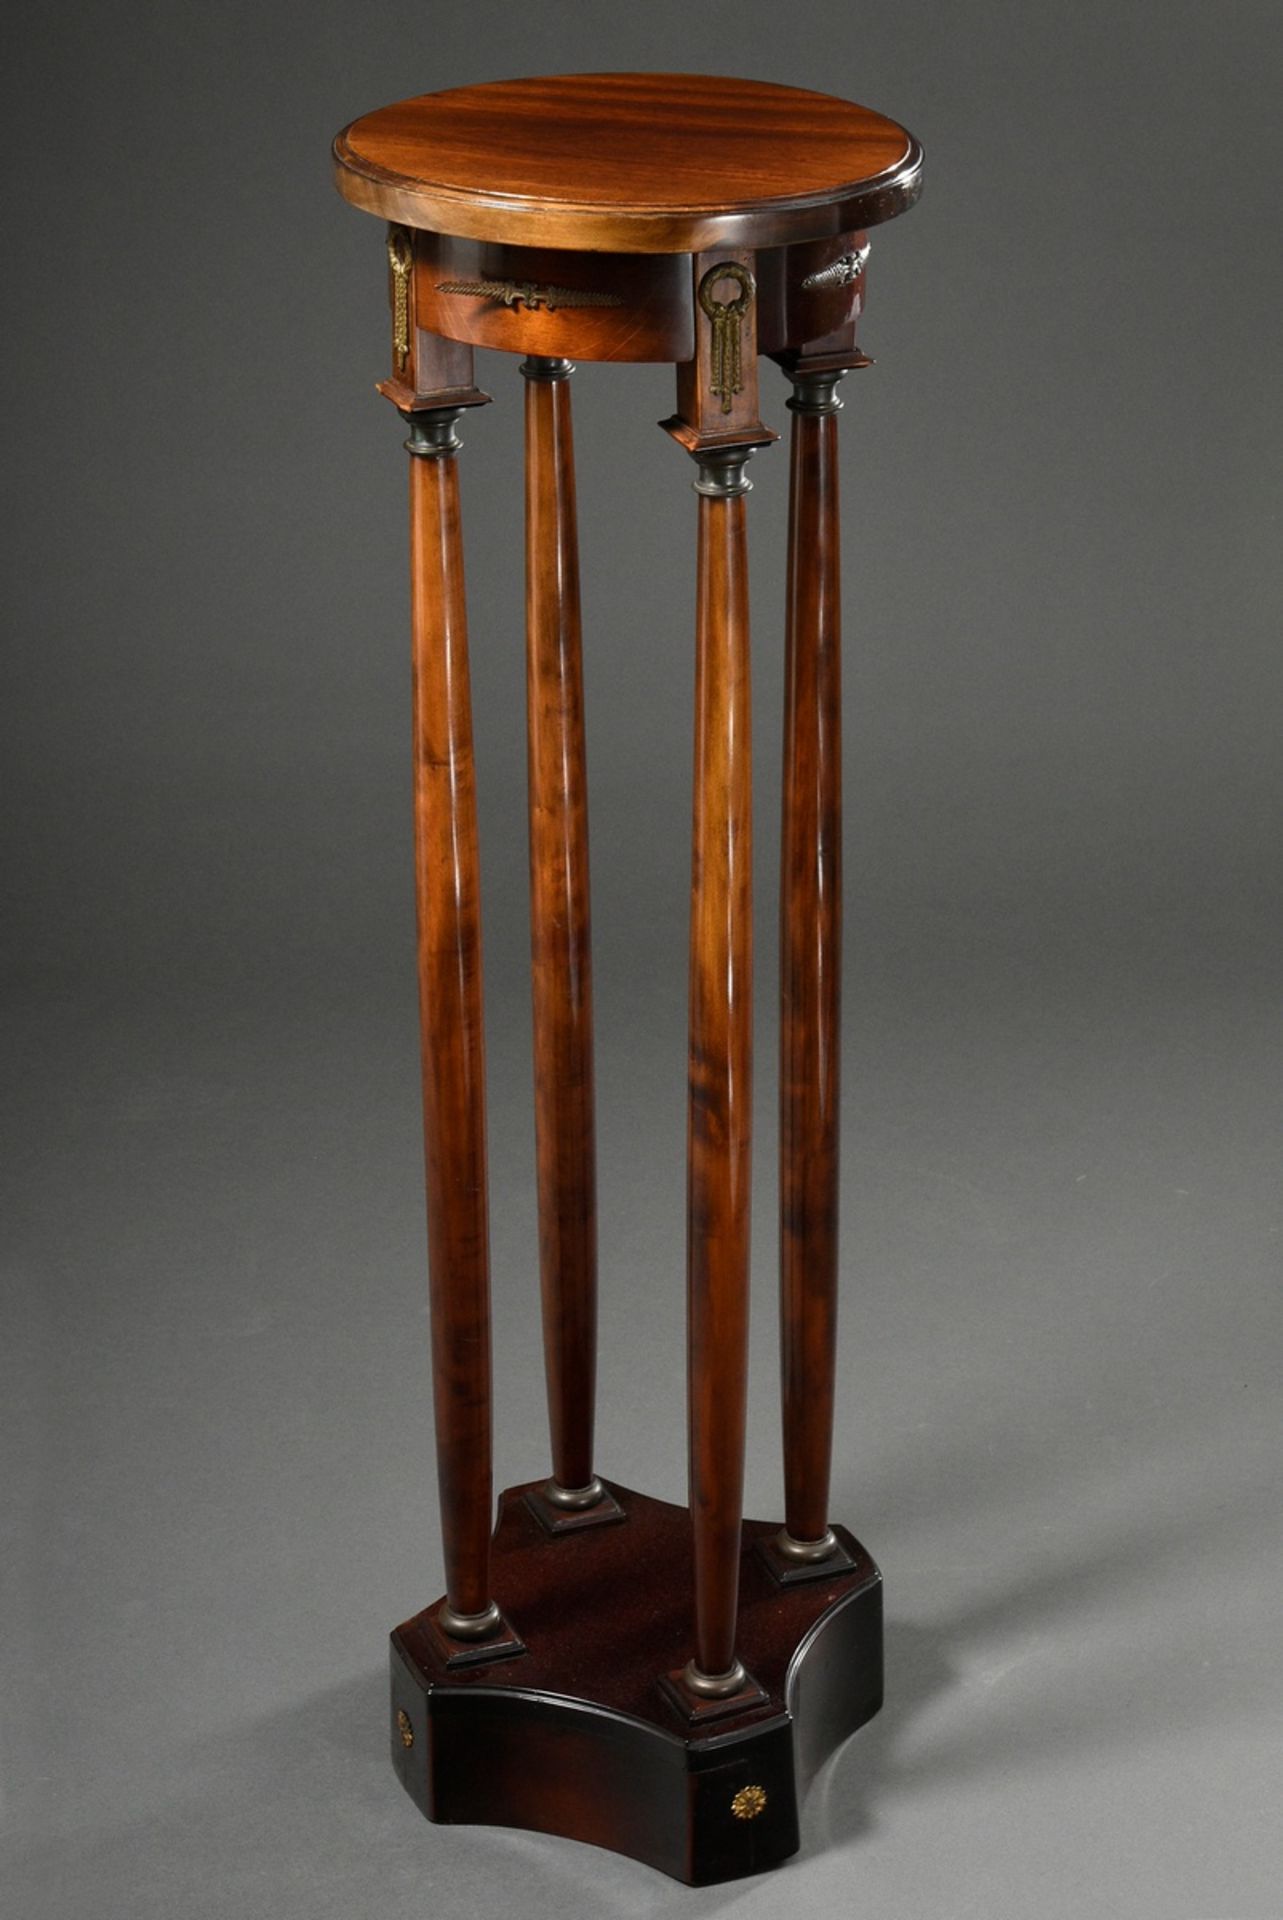 Wilhelminian flower stand on 4 columns with bronze applications, around 1900, mahogany stained redd